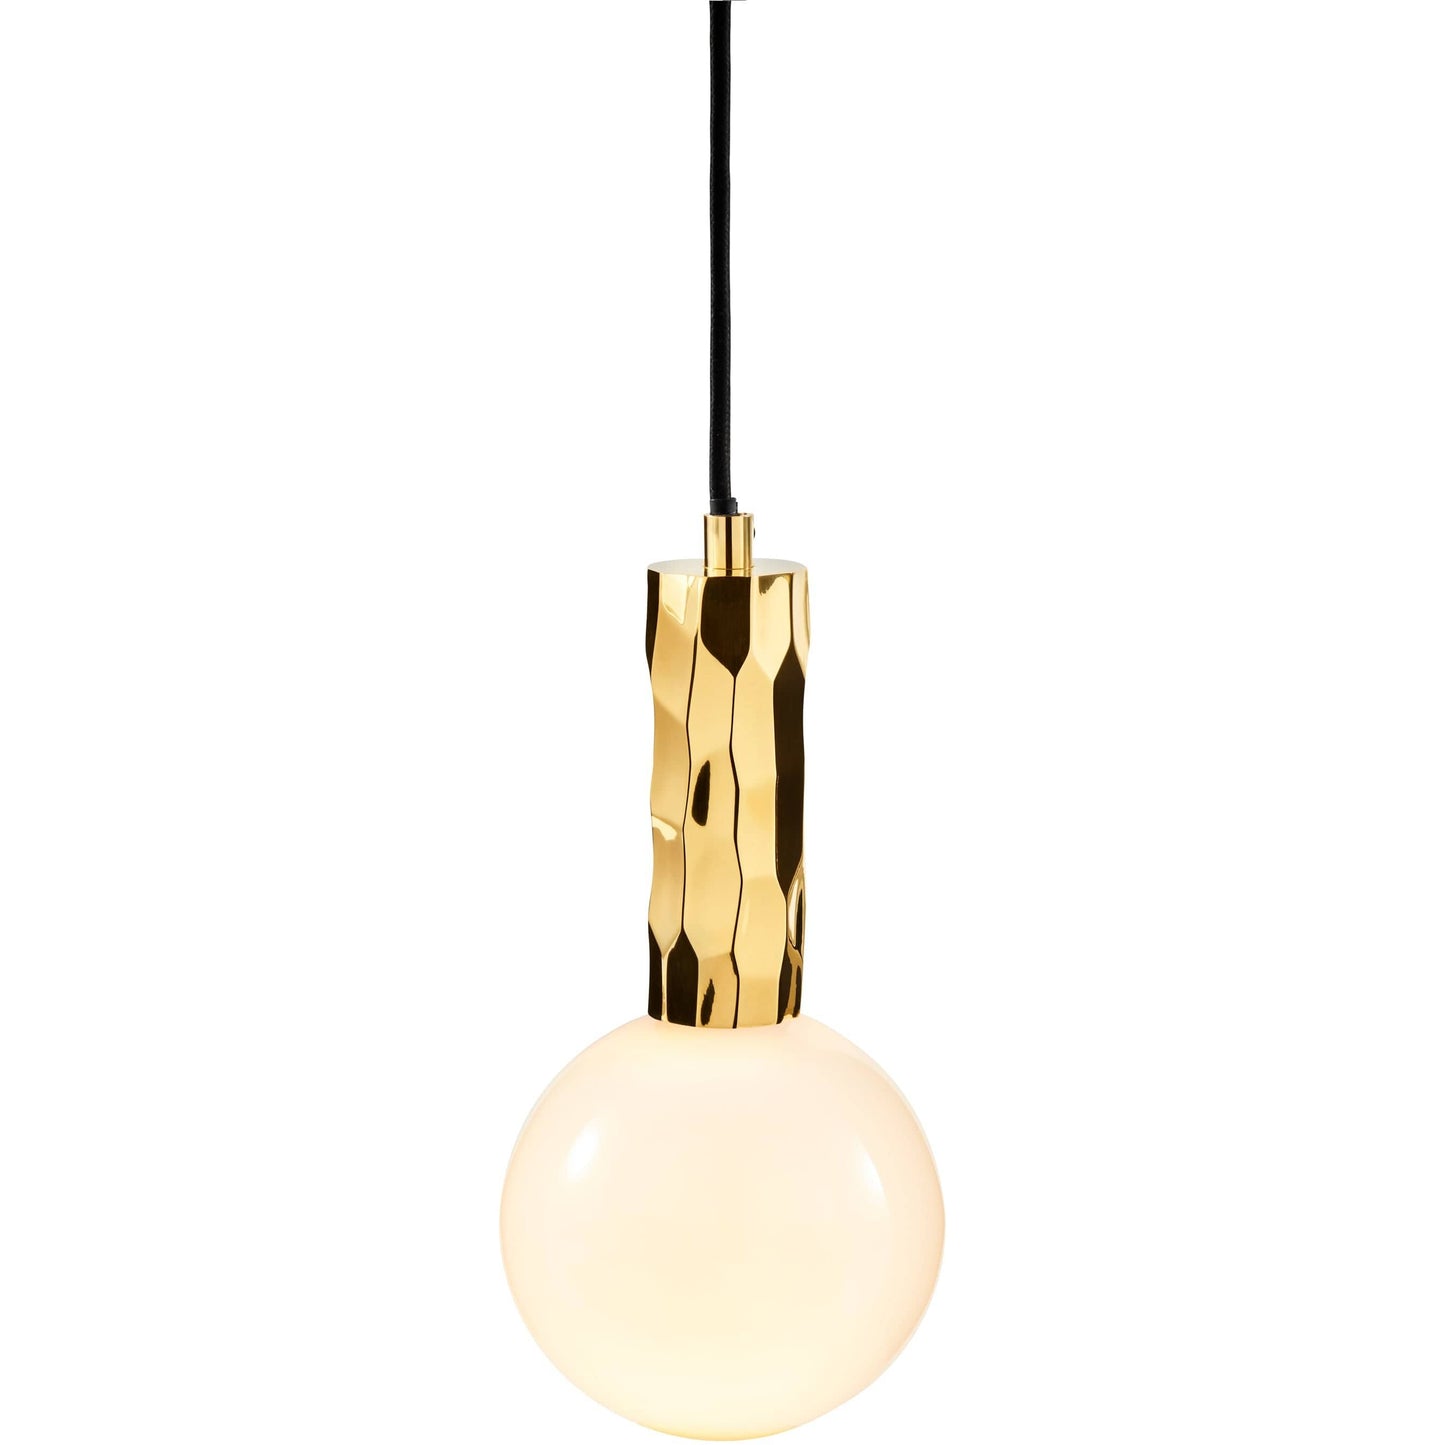 Alex Price Pendant lights White Glass KYOTO Pendant Light Brass with White, Smoked or Clear Glass